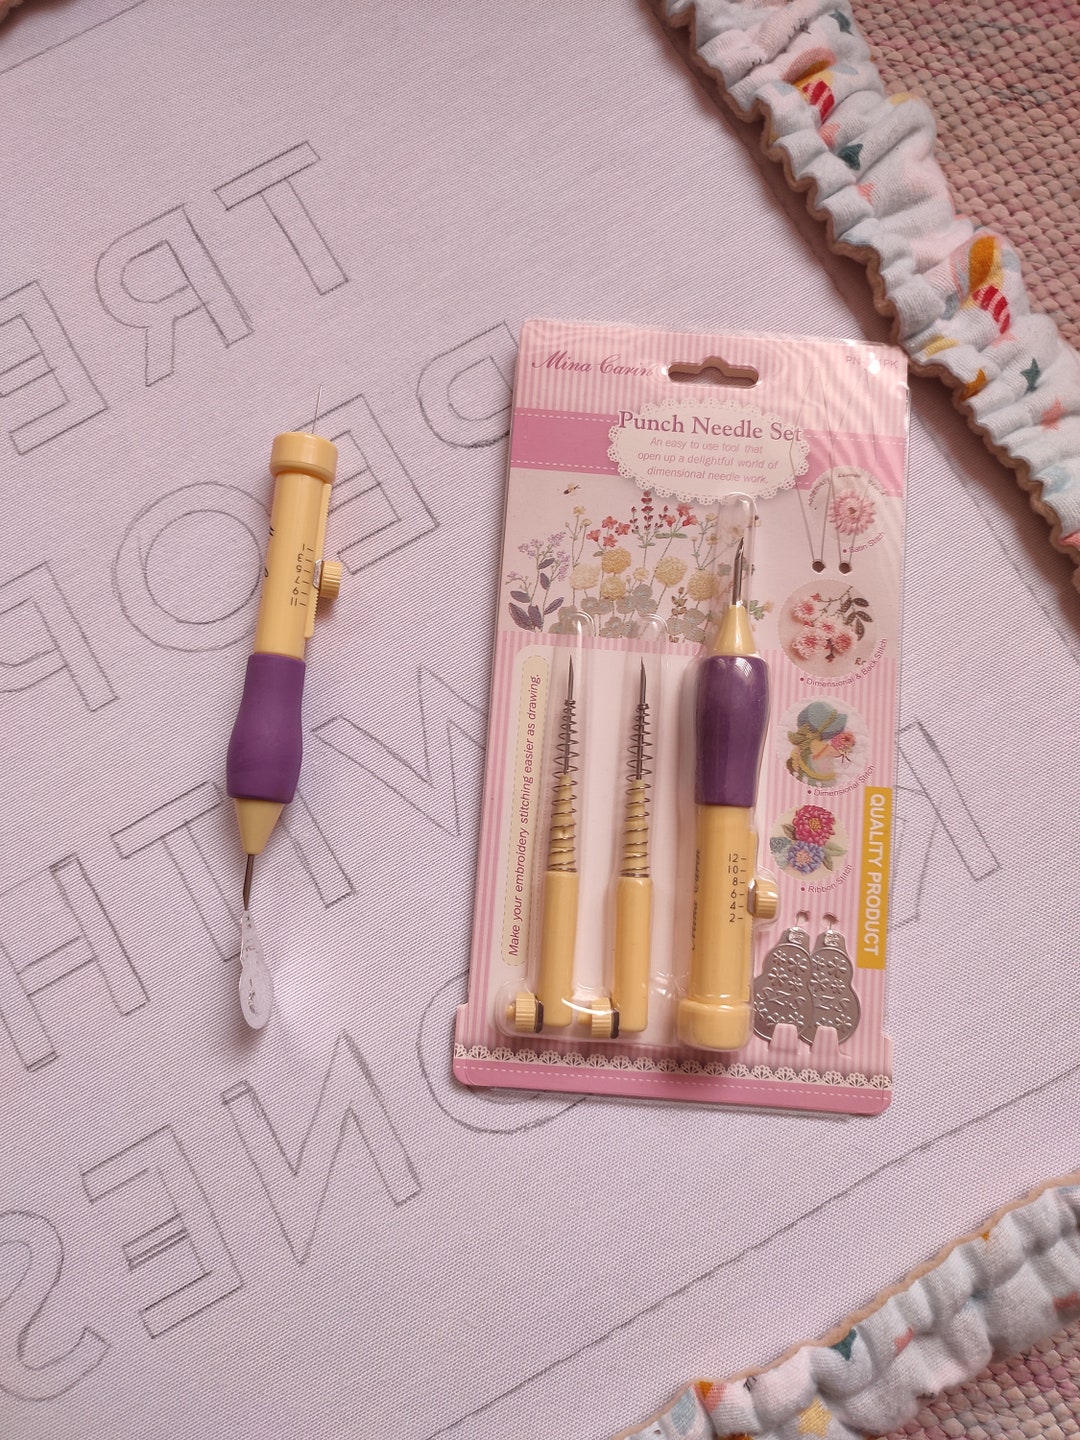 Mina Carin Punch Needle Embroidery Set Adjustable Loop Lengths 3